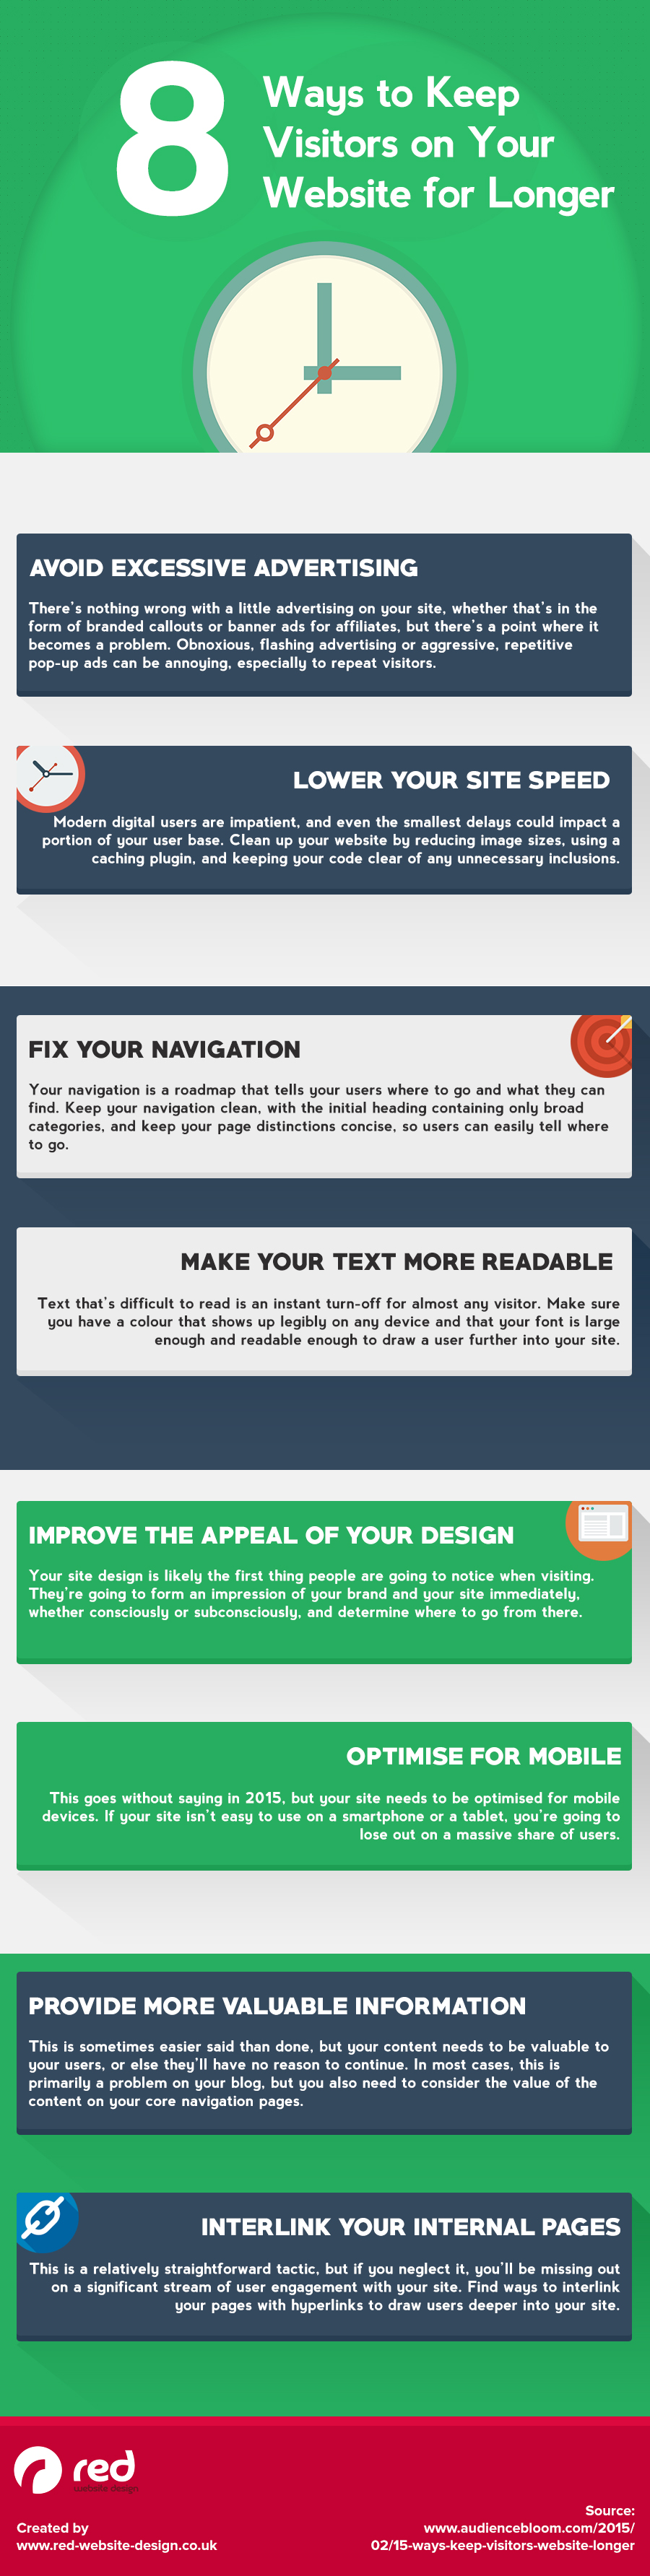 8-really-easy-ways-to-keep-visitors-on-your-website-for-longer1